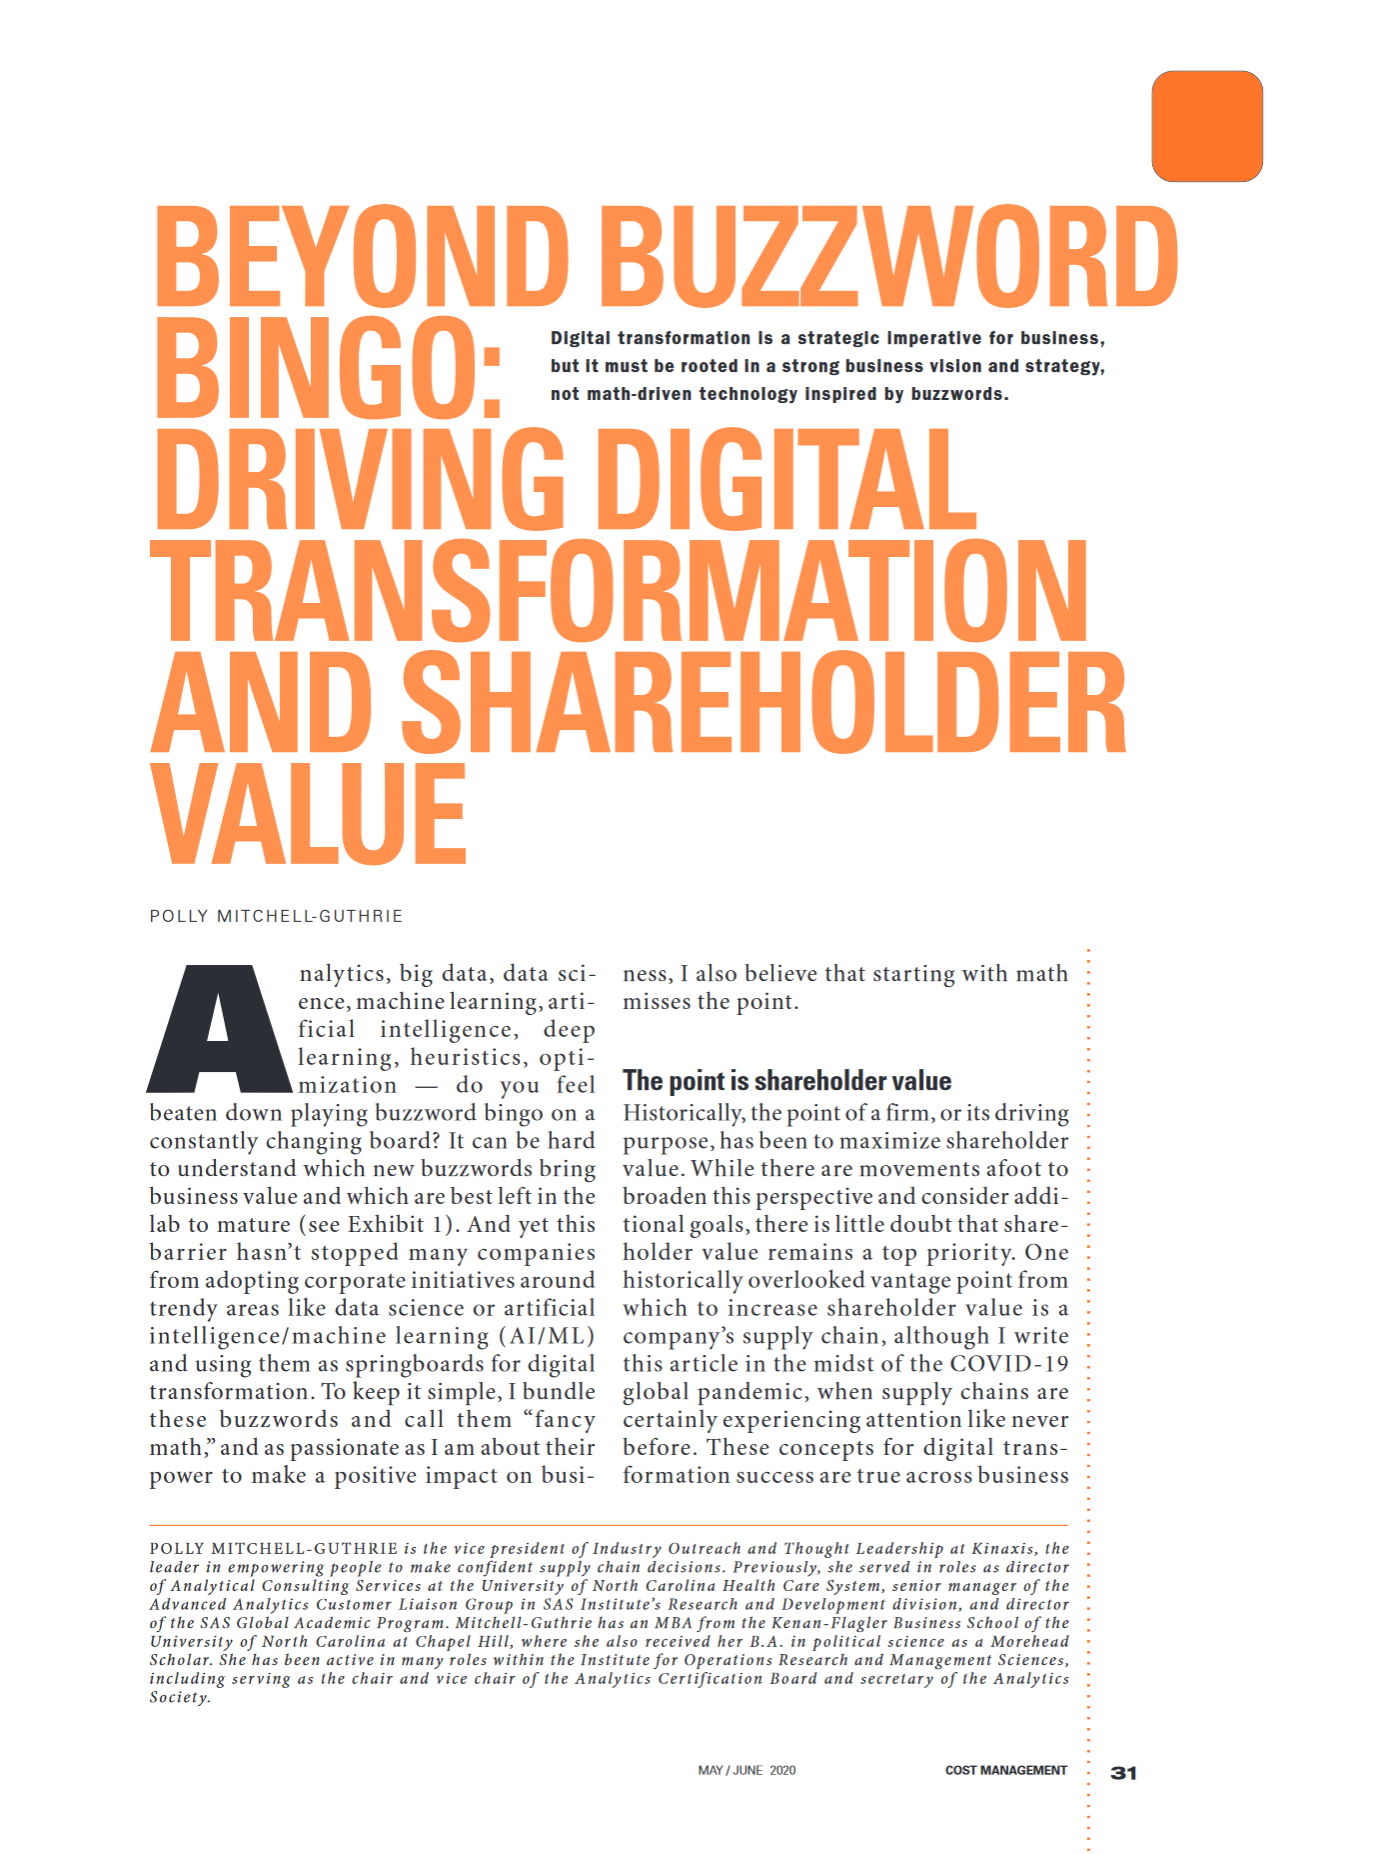 Check out "Beyond buzzword bingo: Driving digital transformation and shareholder value."